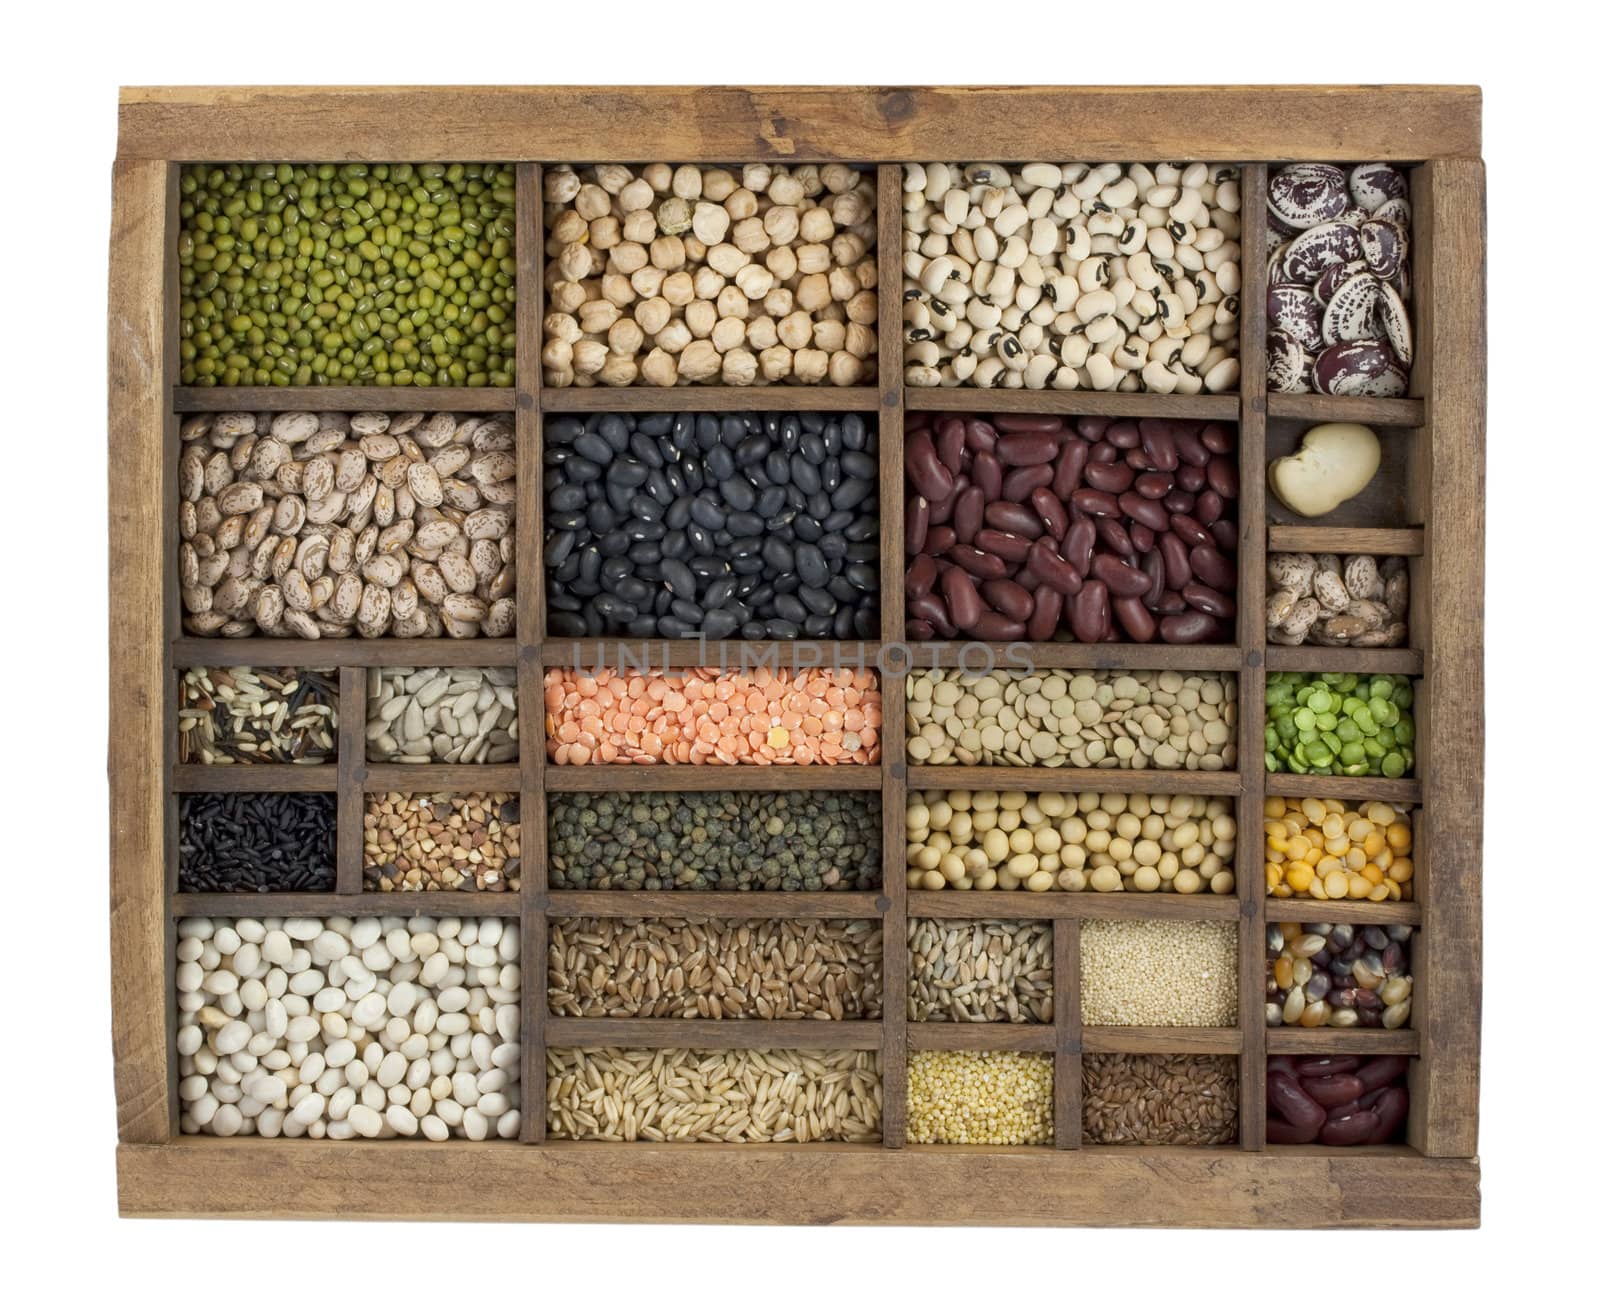 variety of beans, grains and seeds in vintage typesetter box by PixelsAway